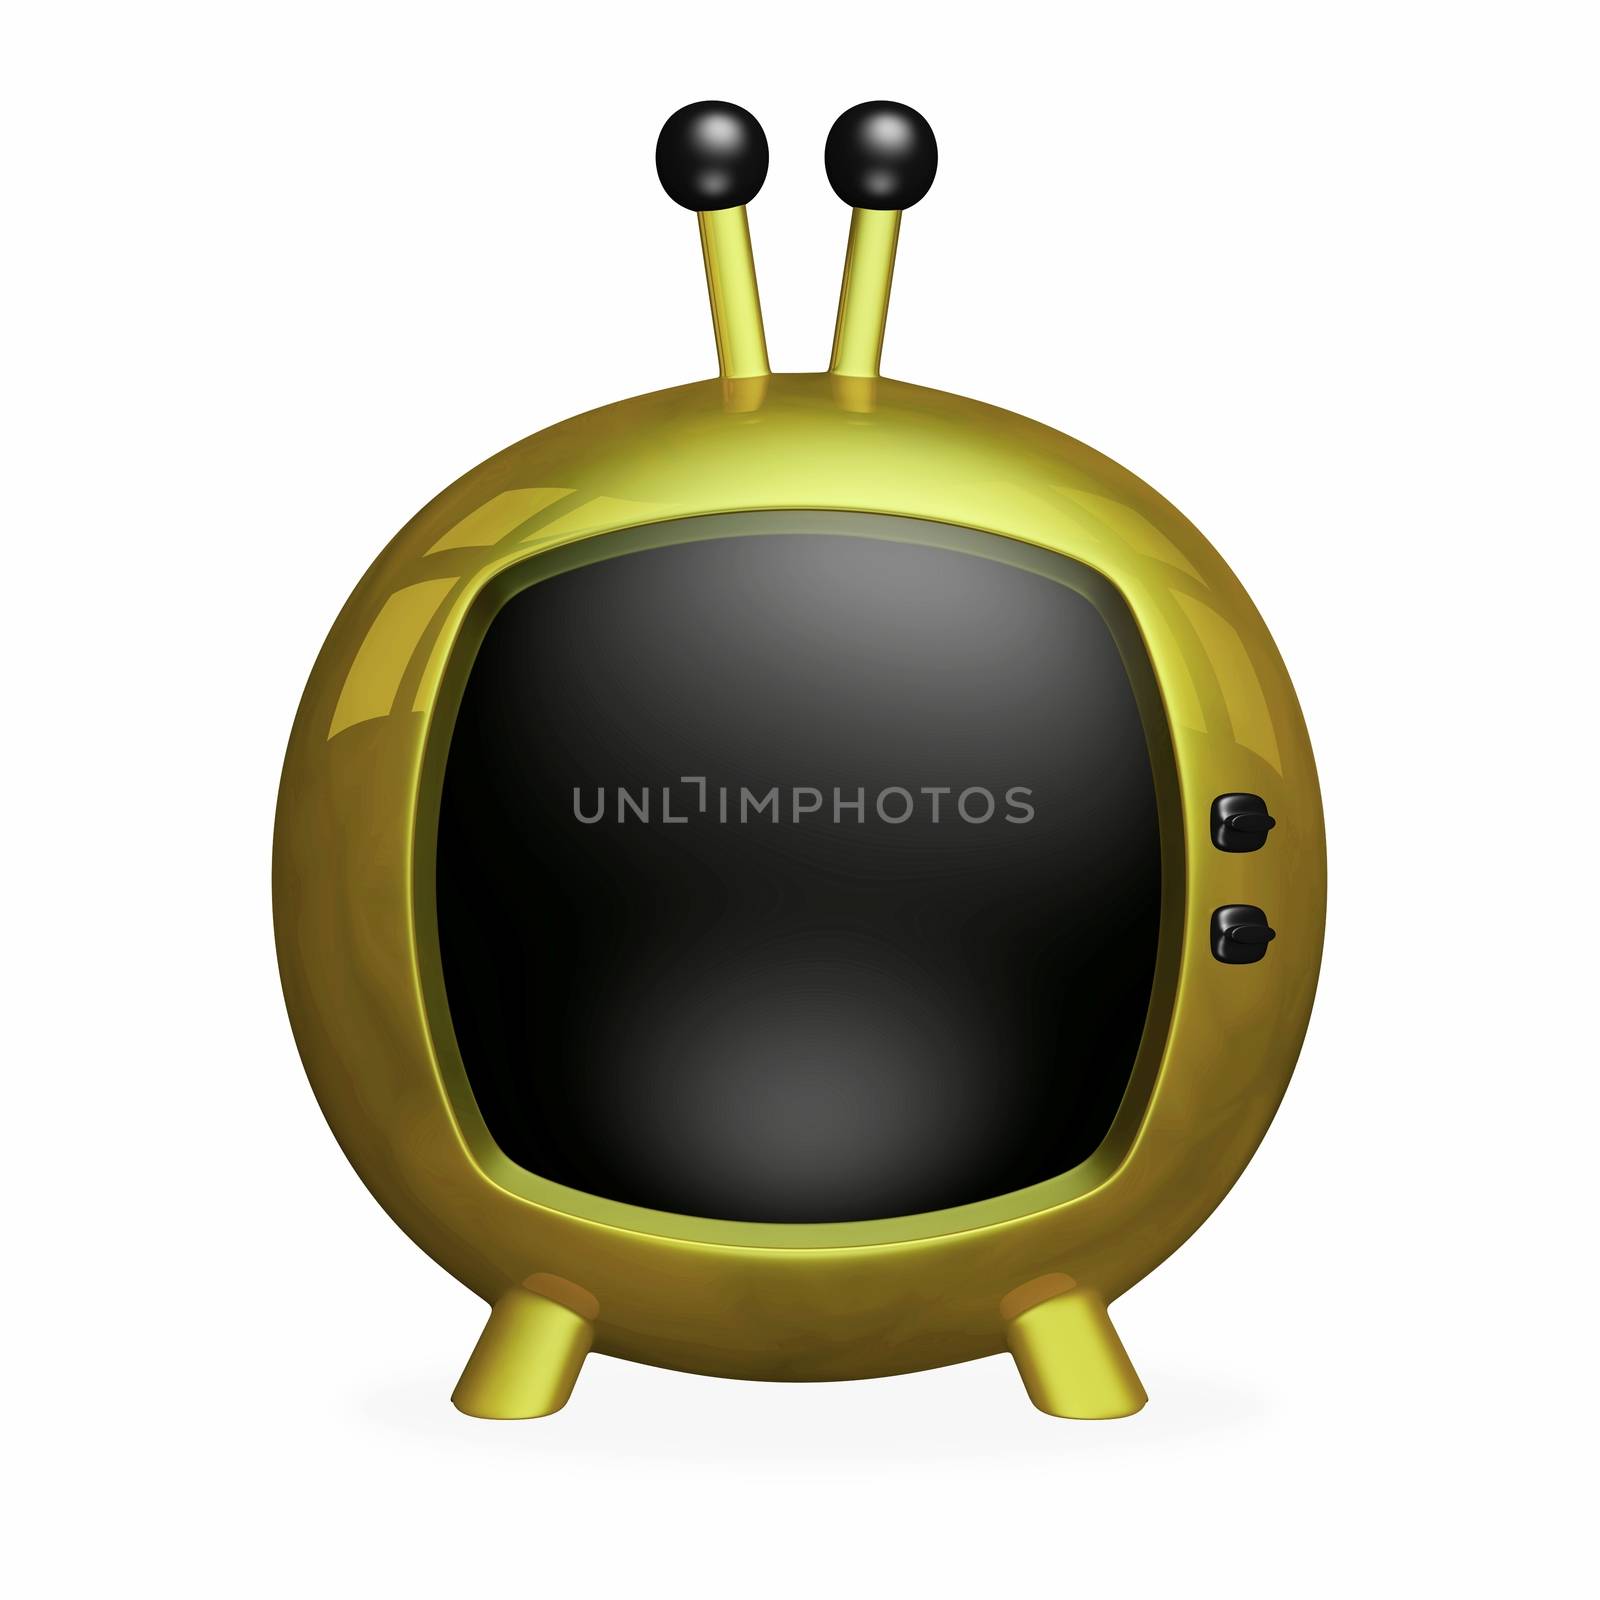 Cartoon 3D retro style TV, made of gold, with a blank black screen. Can be used for displaying broadcasts, special offers, announcements. Also suitable for media, entertainment or information distribution concepts
